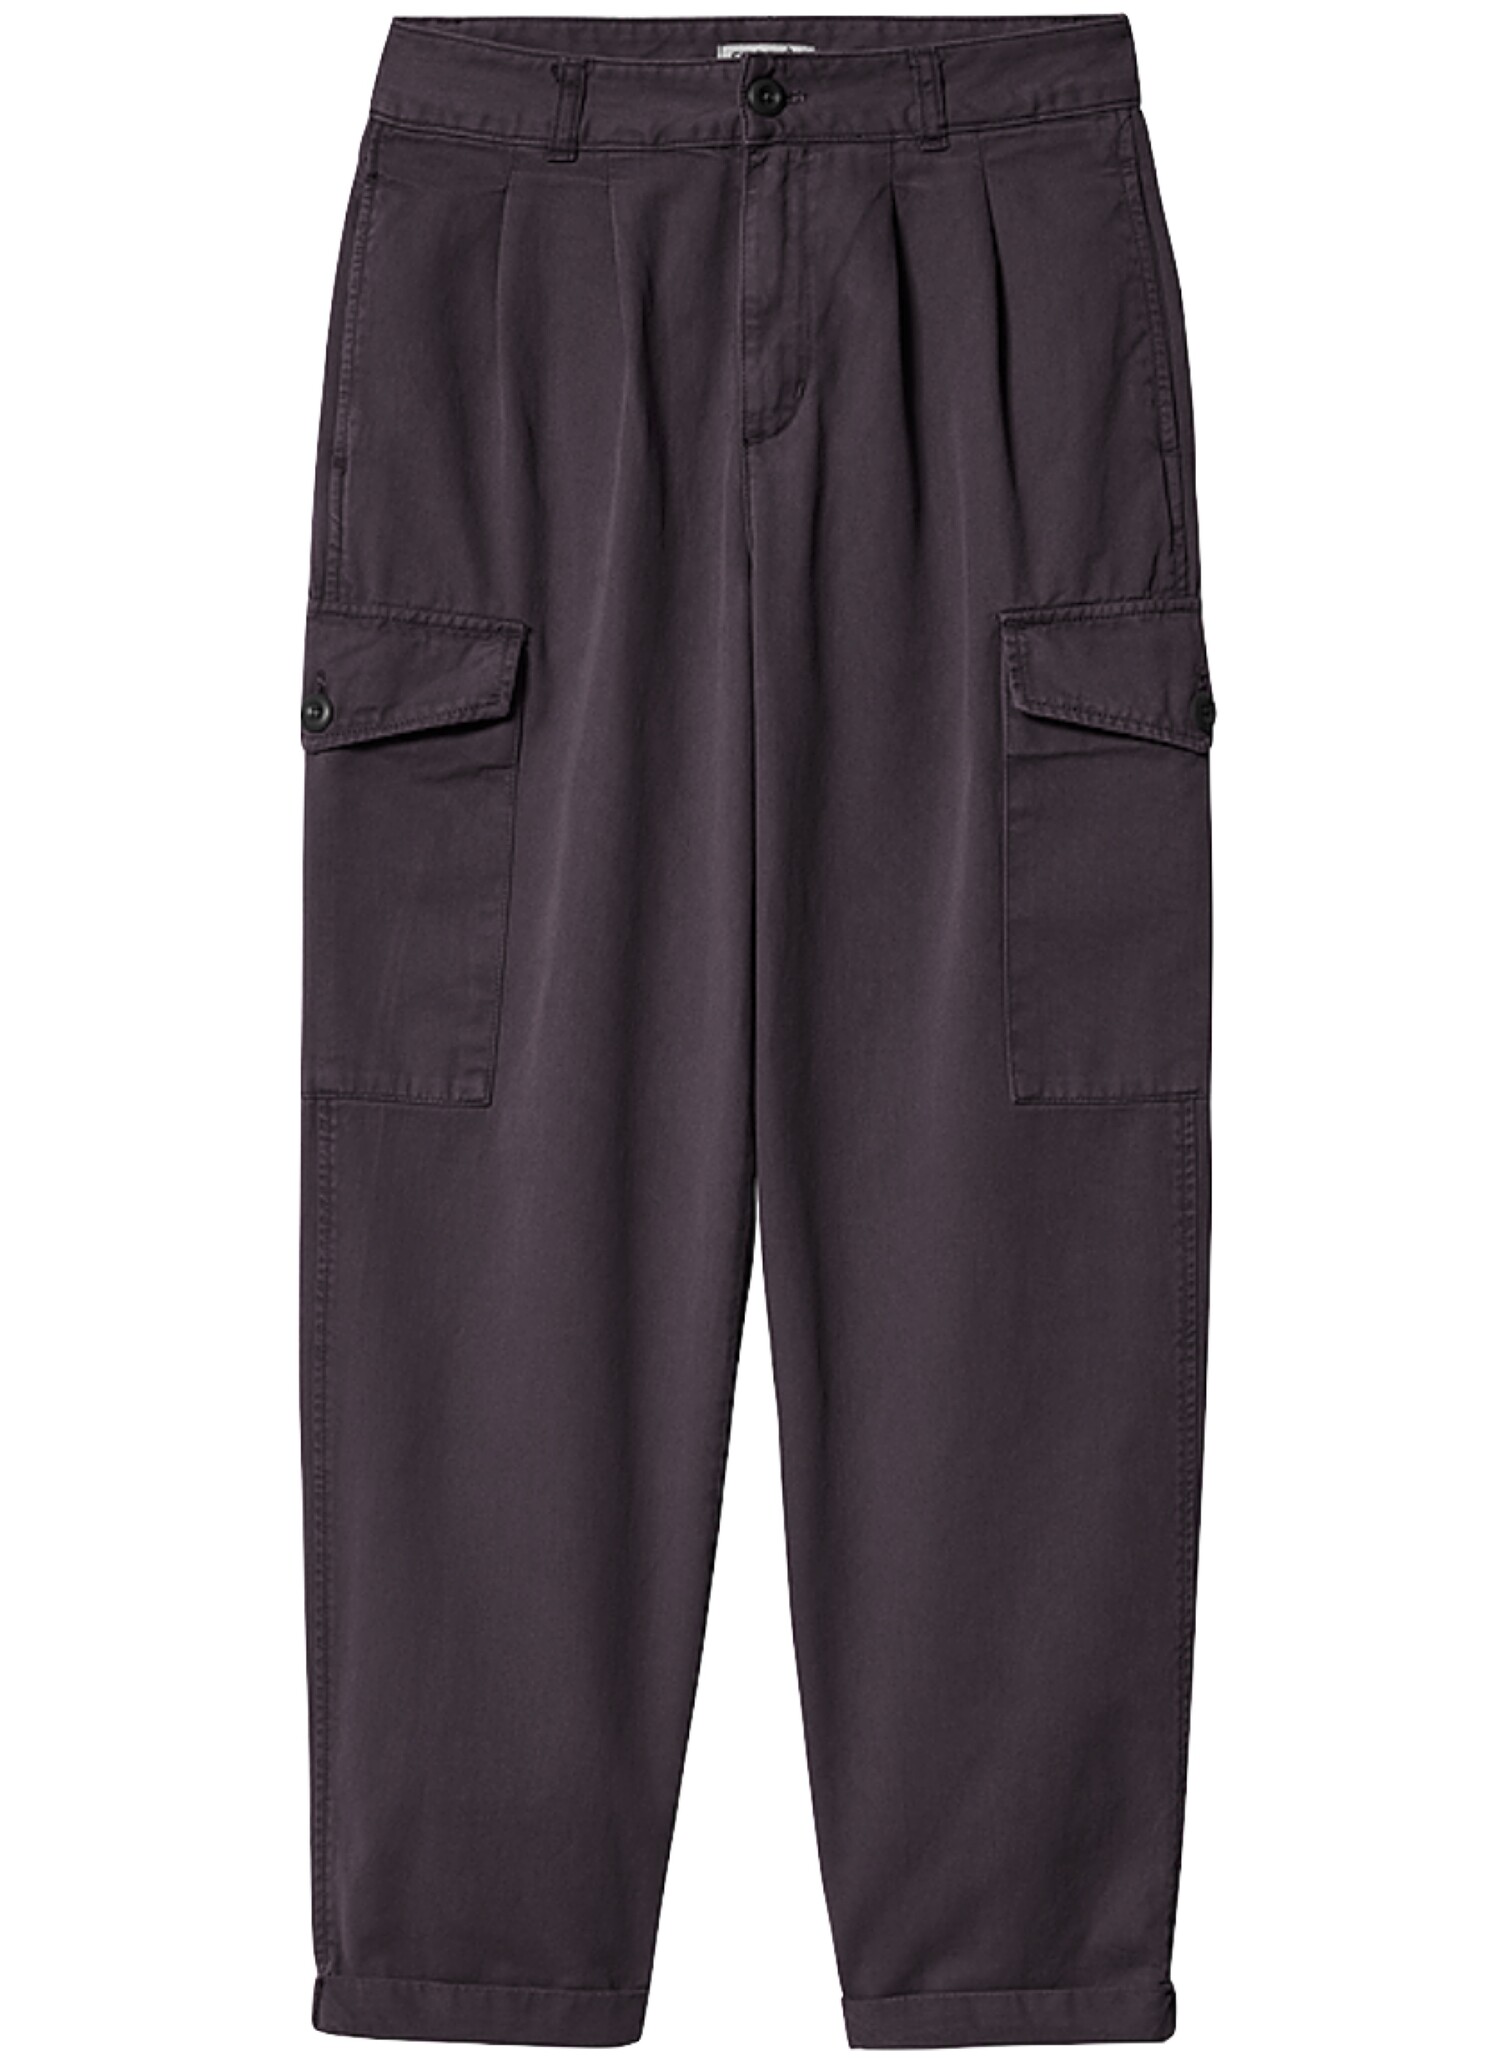 Carhartt WIP Womens Collins Pant - Boxwood (Garment Dyed)